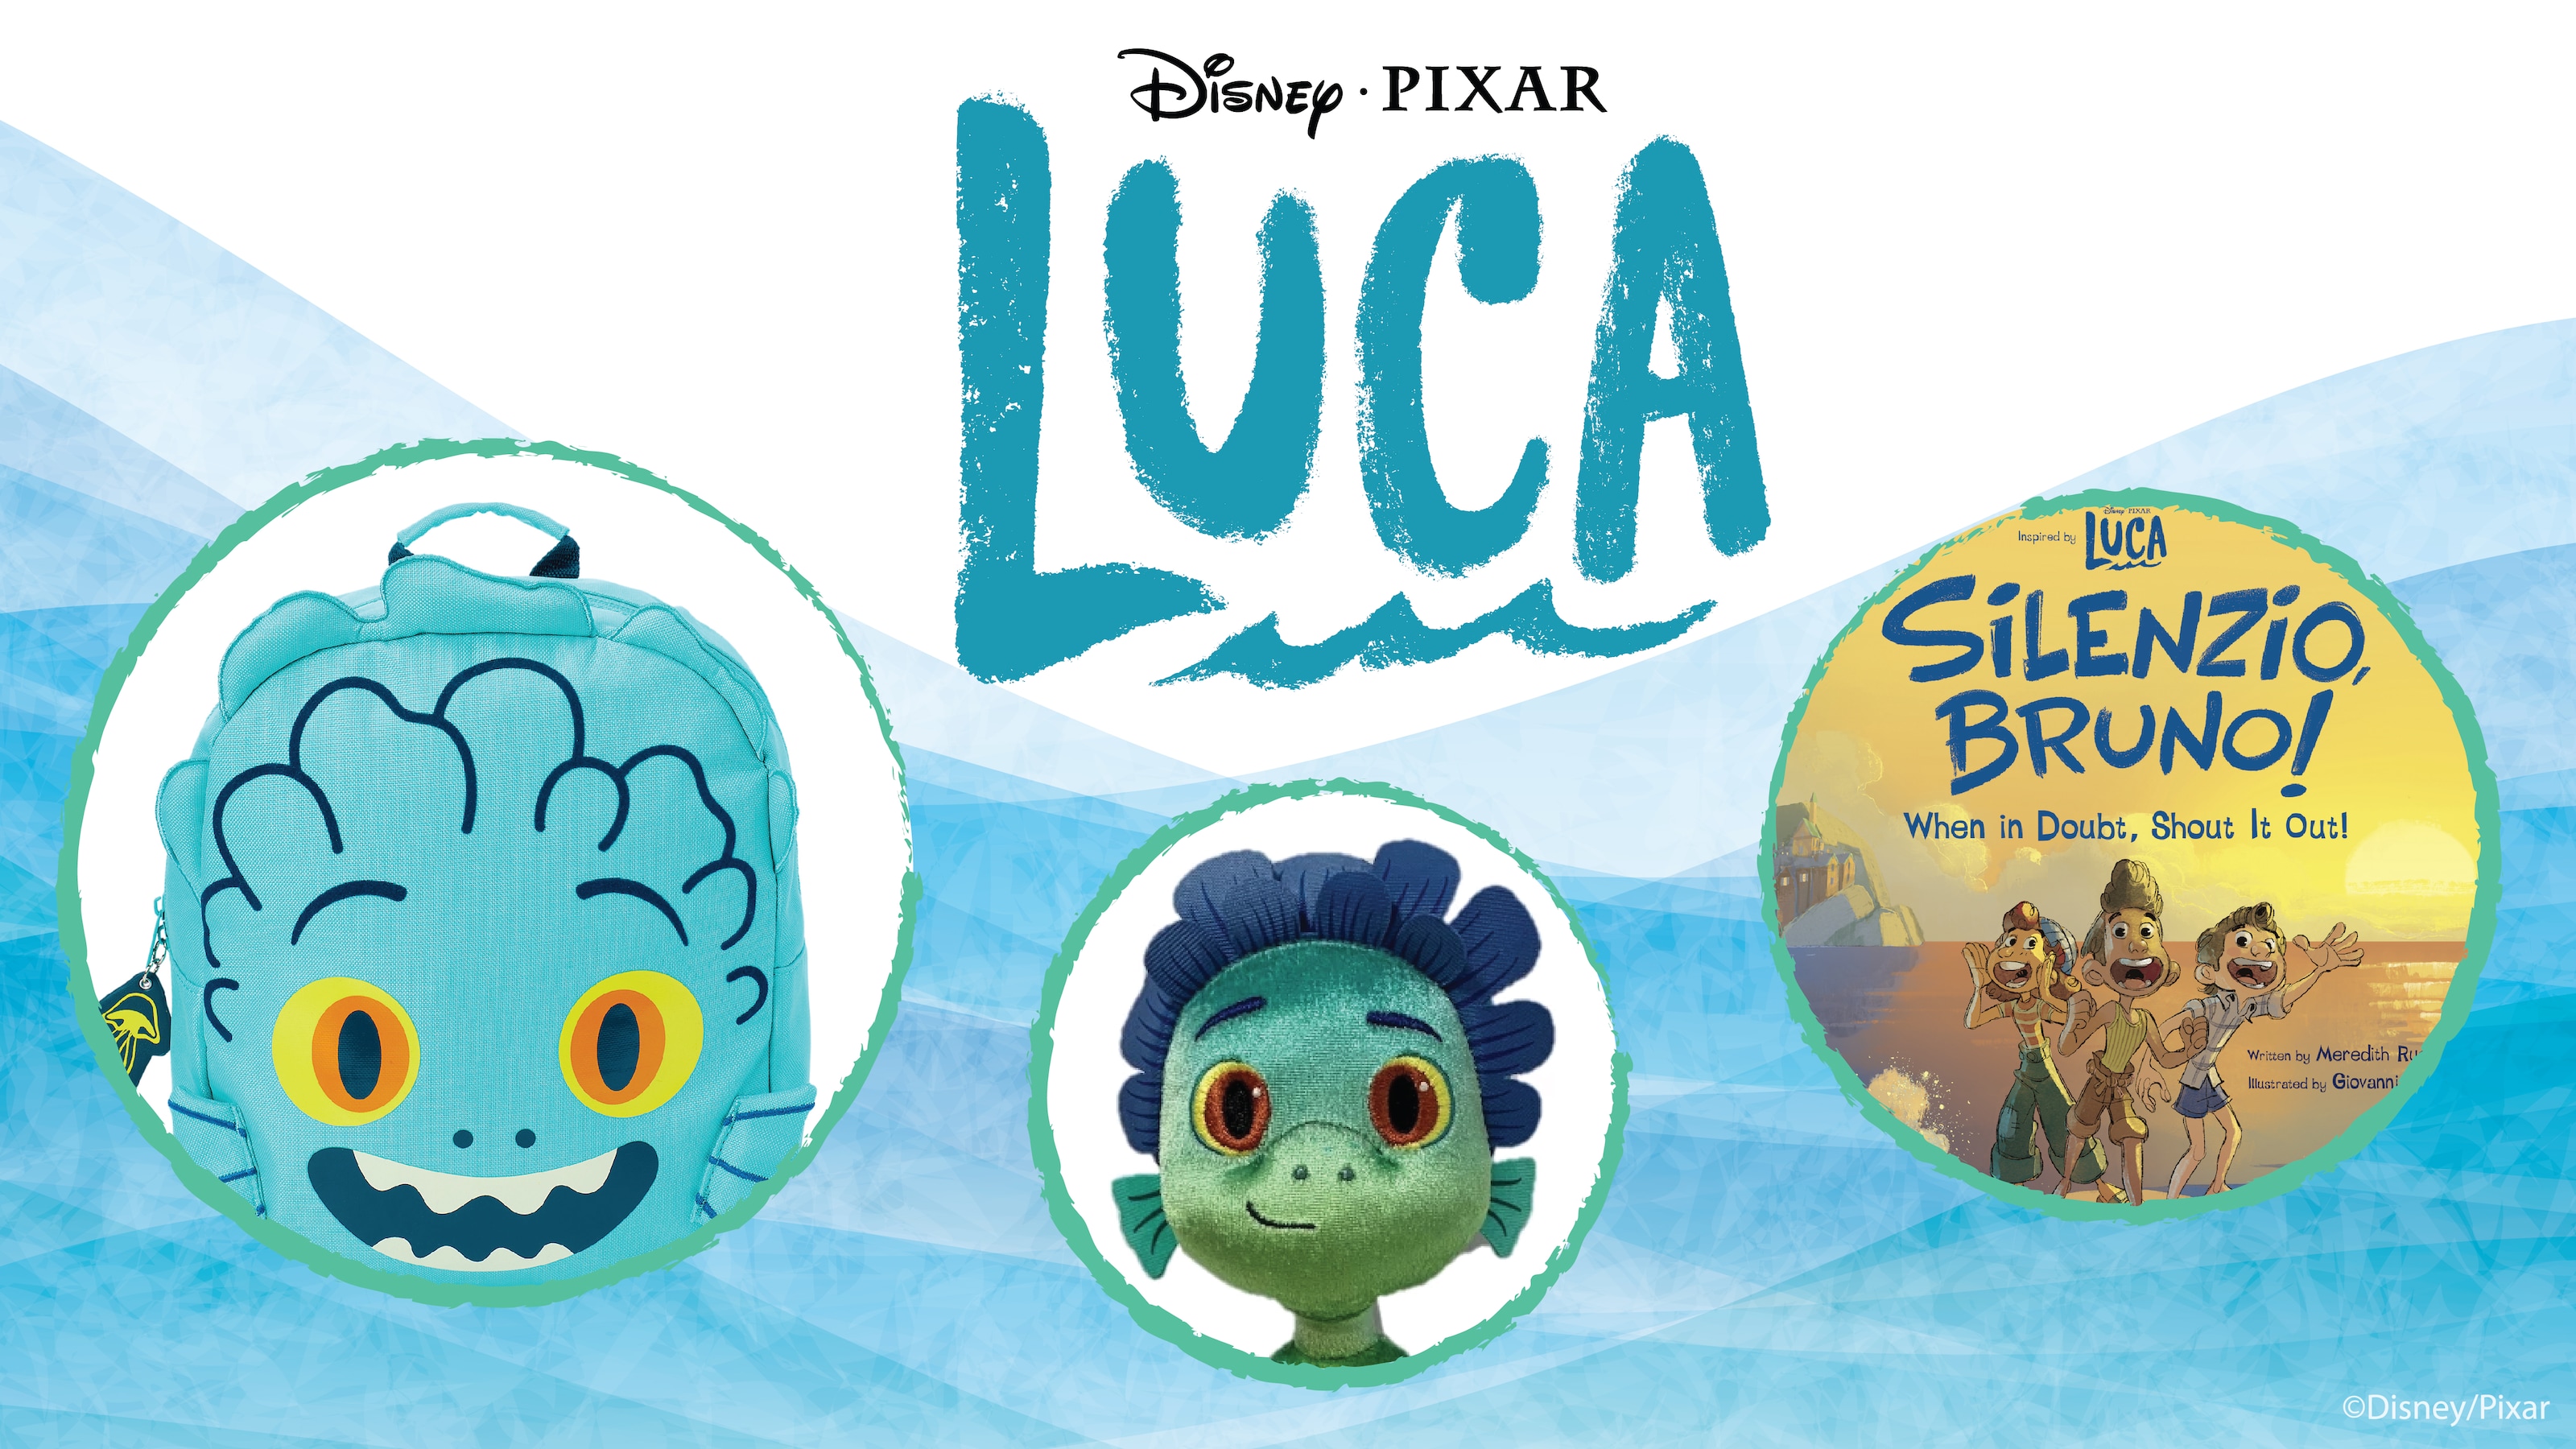 Dive Into Summer With New Luca Merchandise 